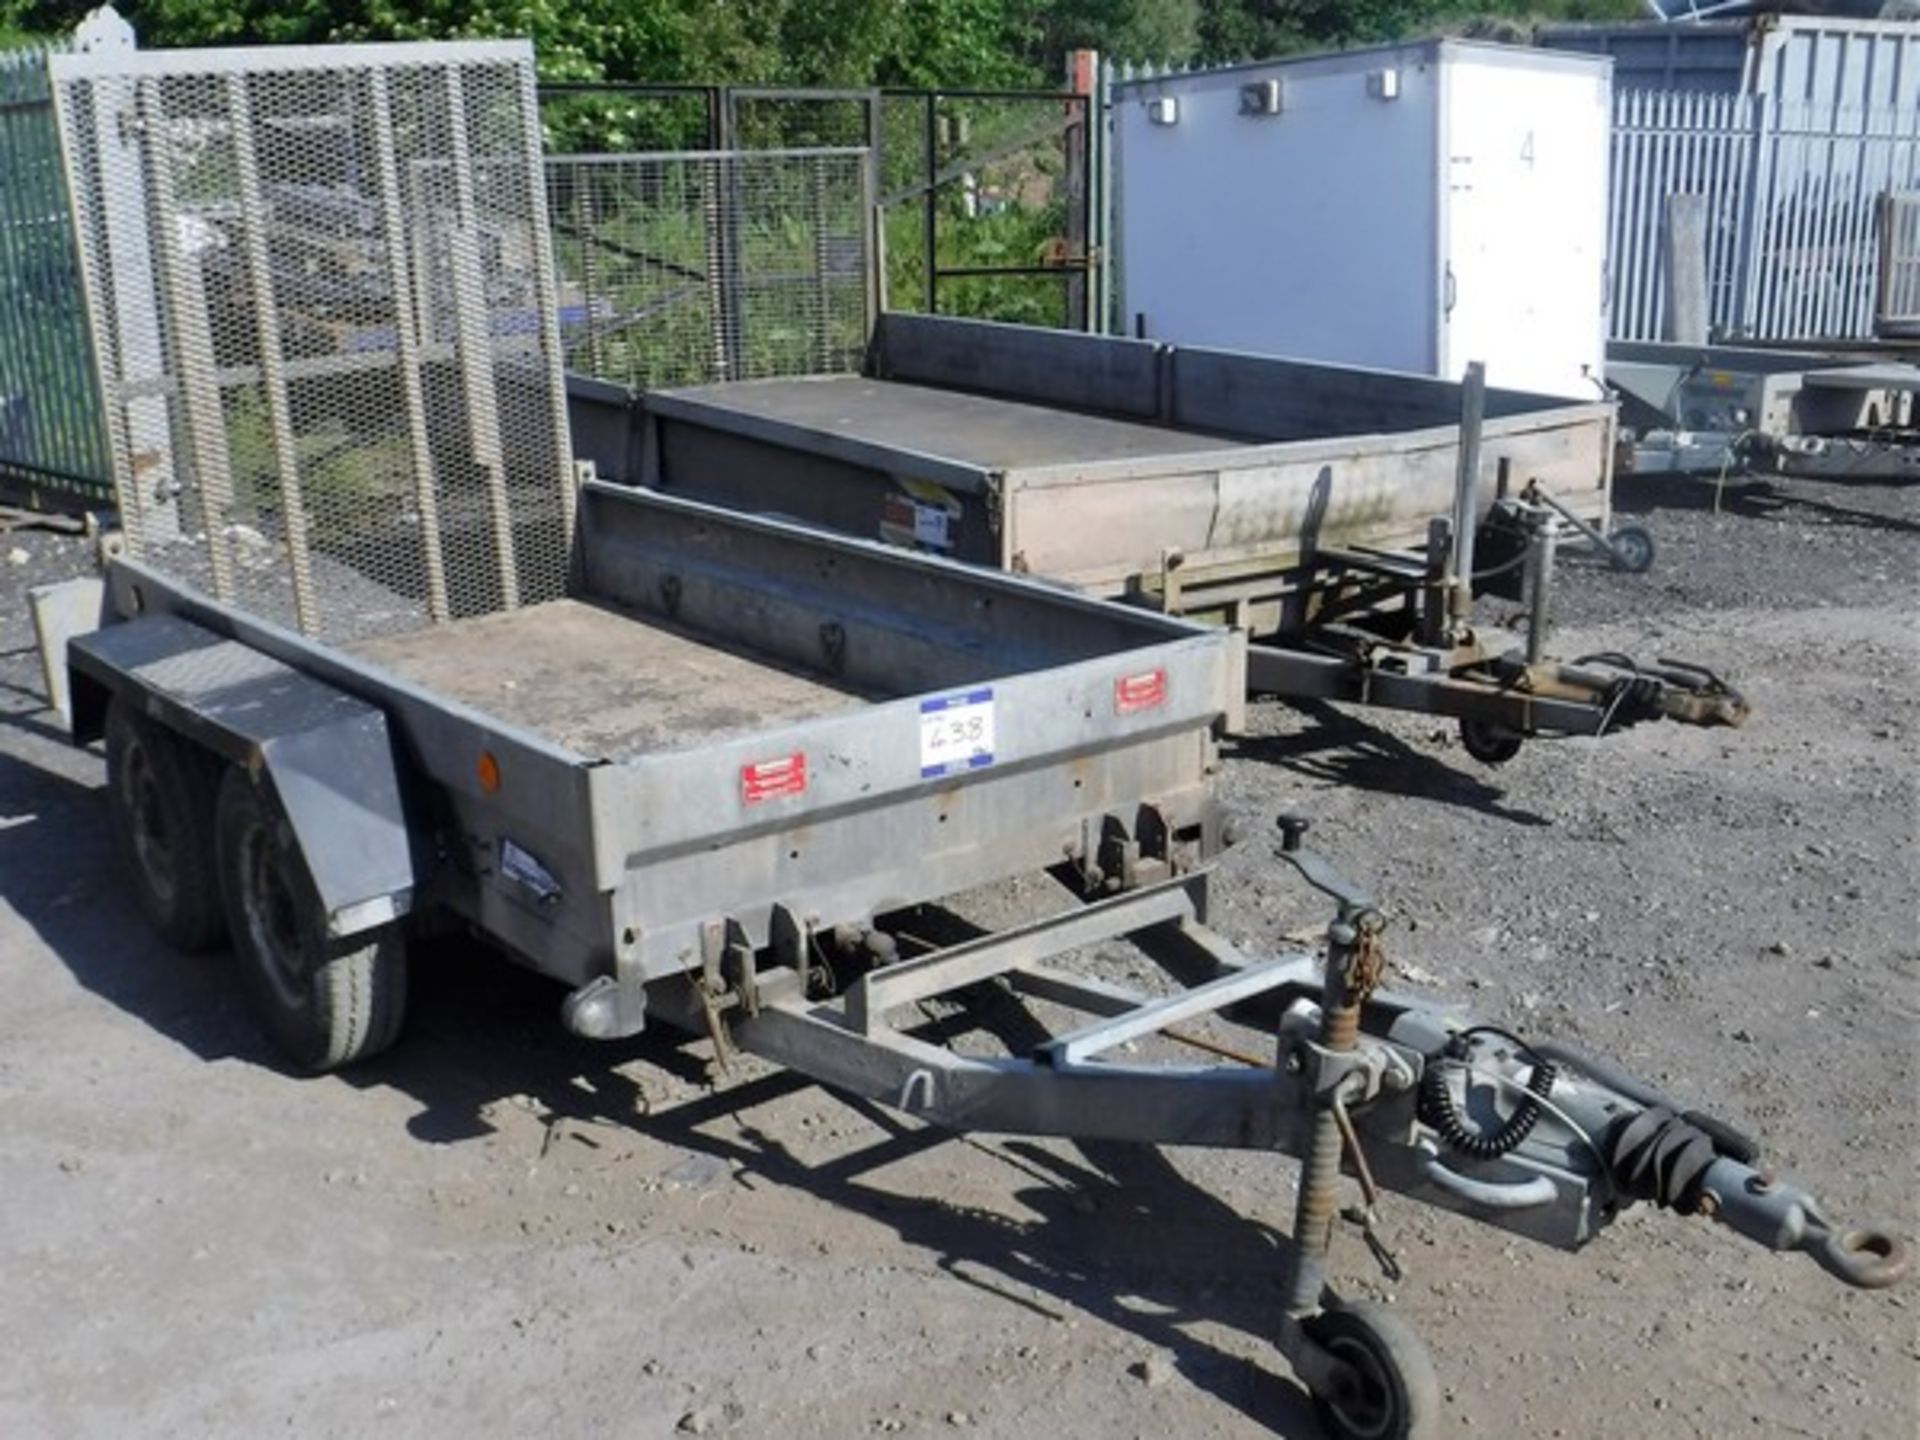 INDESPENSION 8ft x 4ft twin axle plant trailer with mesh ramp. S/N G20840550198. Asset no 758-8039